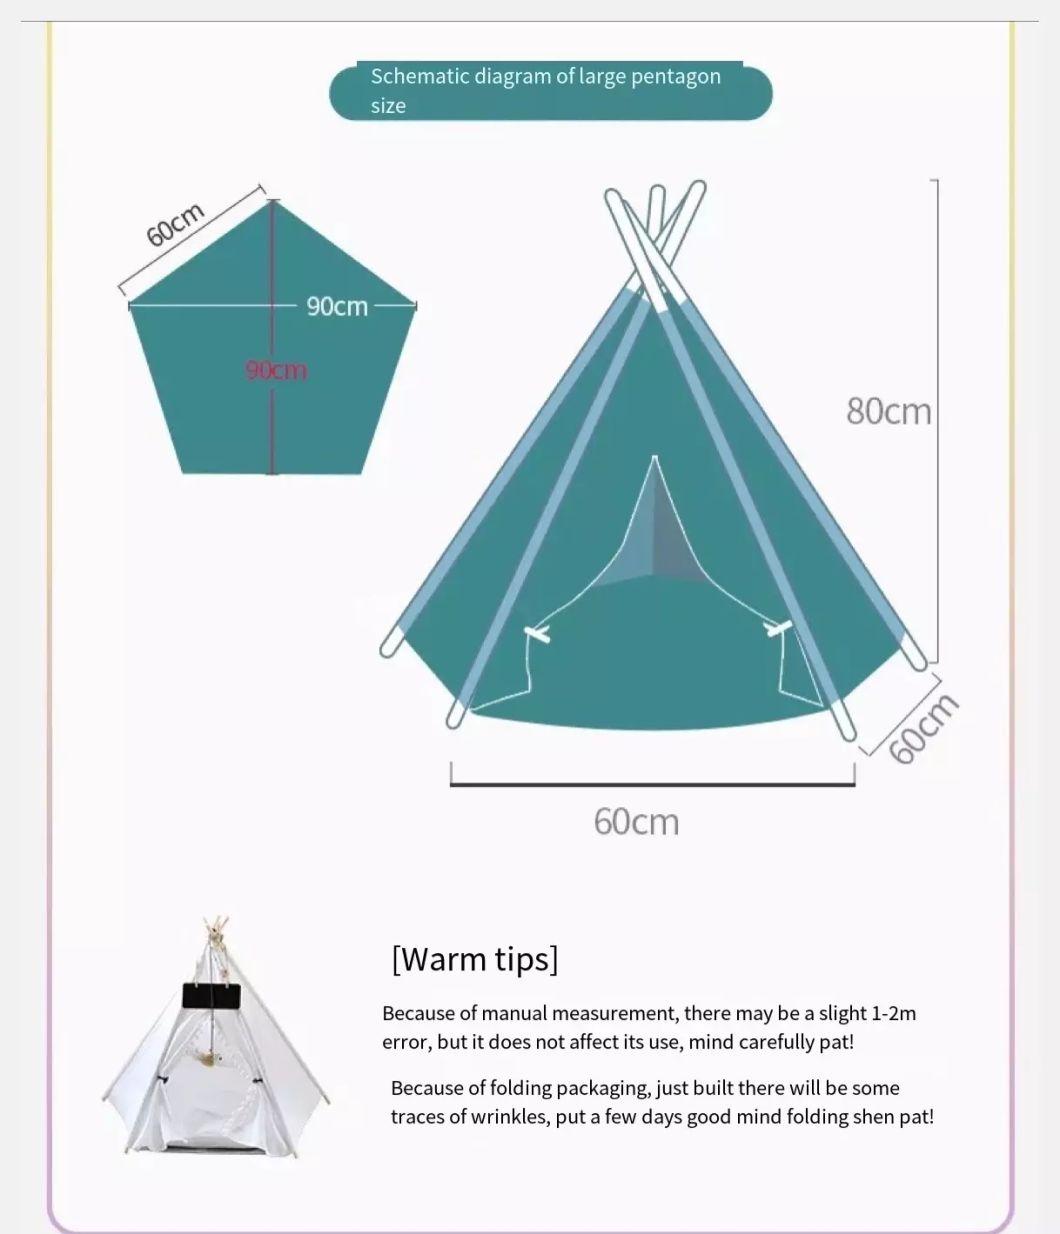 Wholesale High-Quality and Easy-to-Install Pet Tent Houses